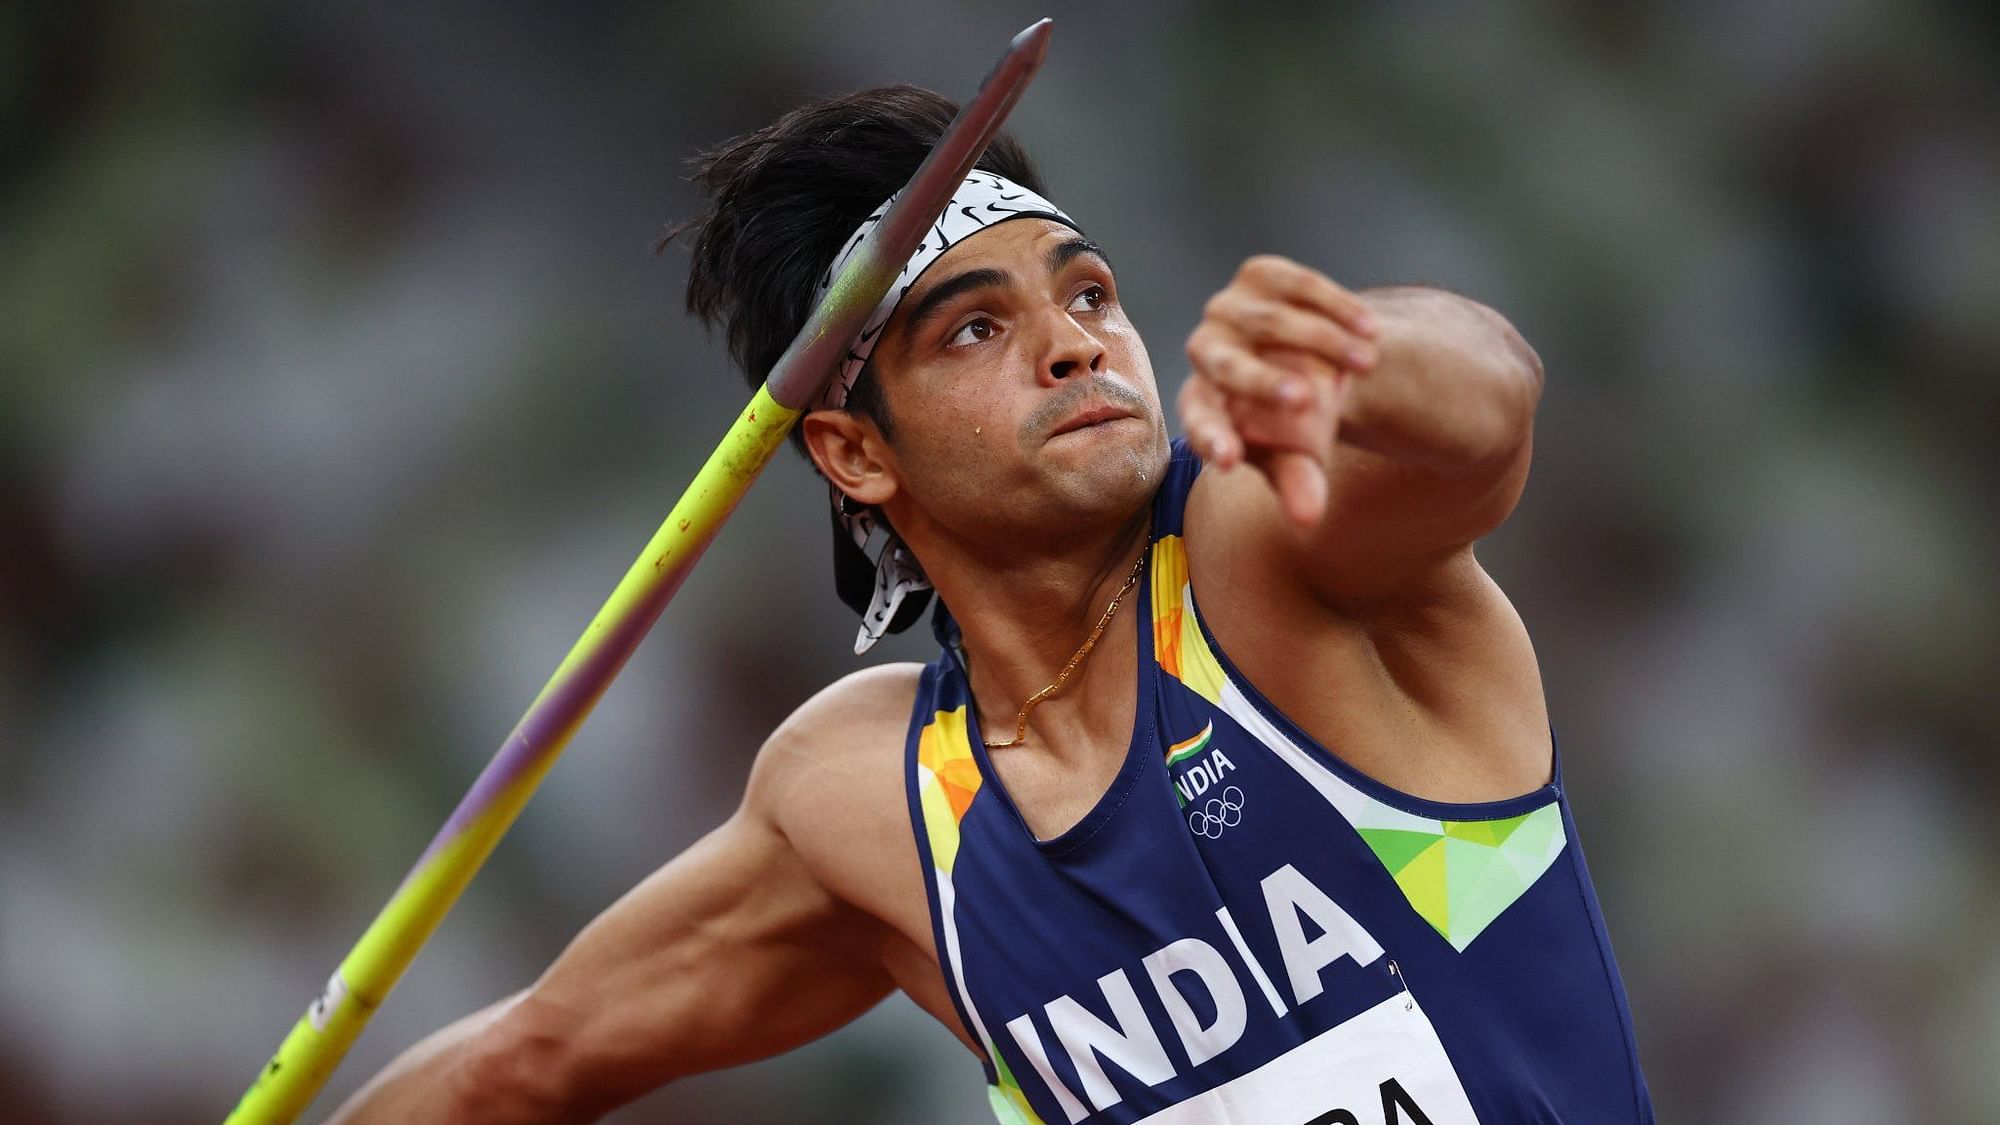 Watch Video: The Throw That Helped Neeraj Chopra Win India's Historic Gold